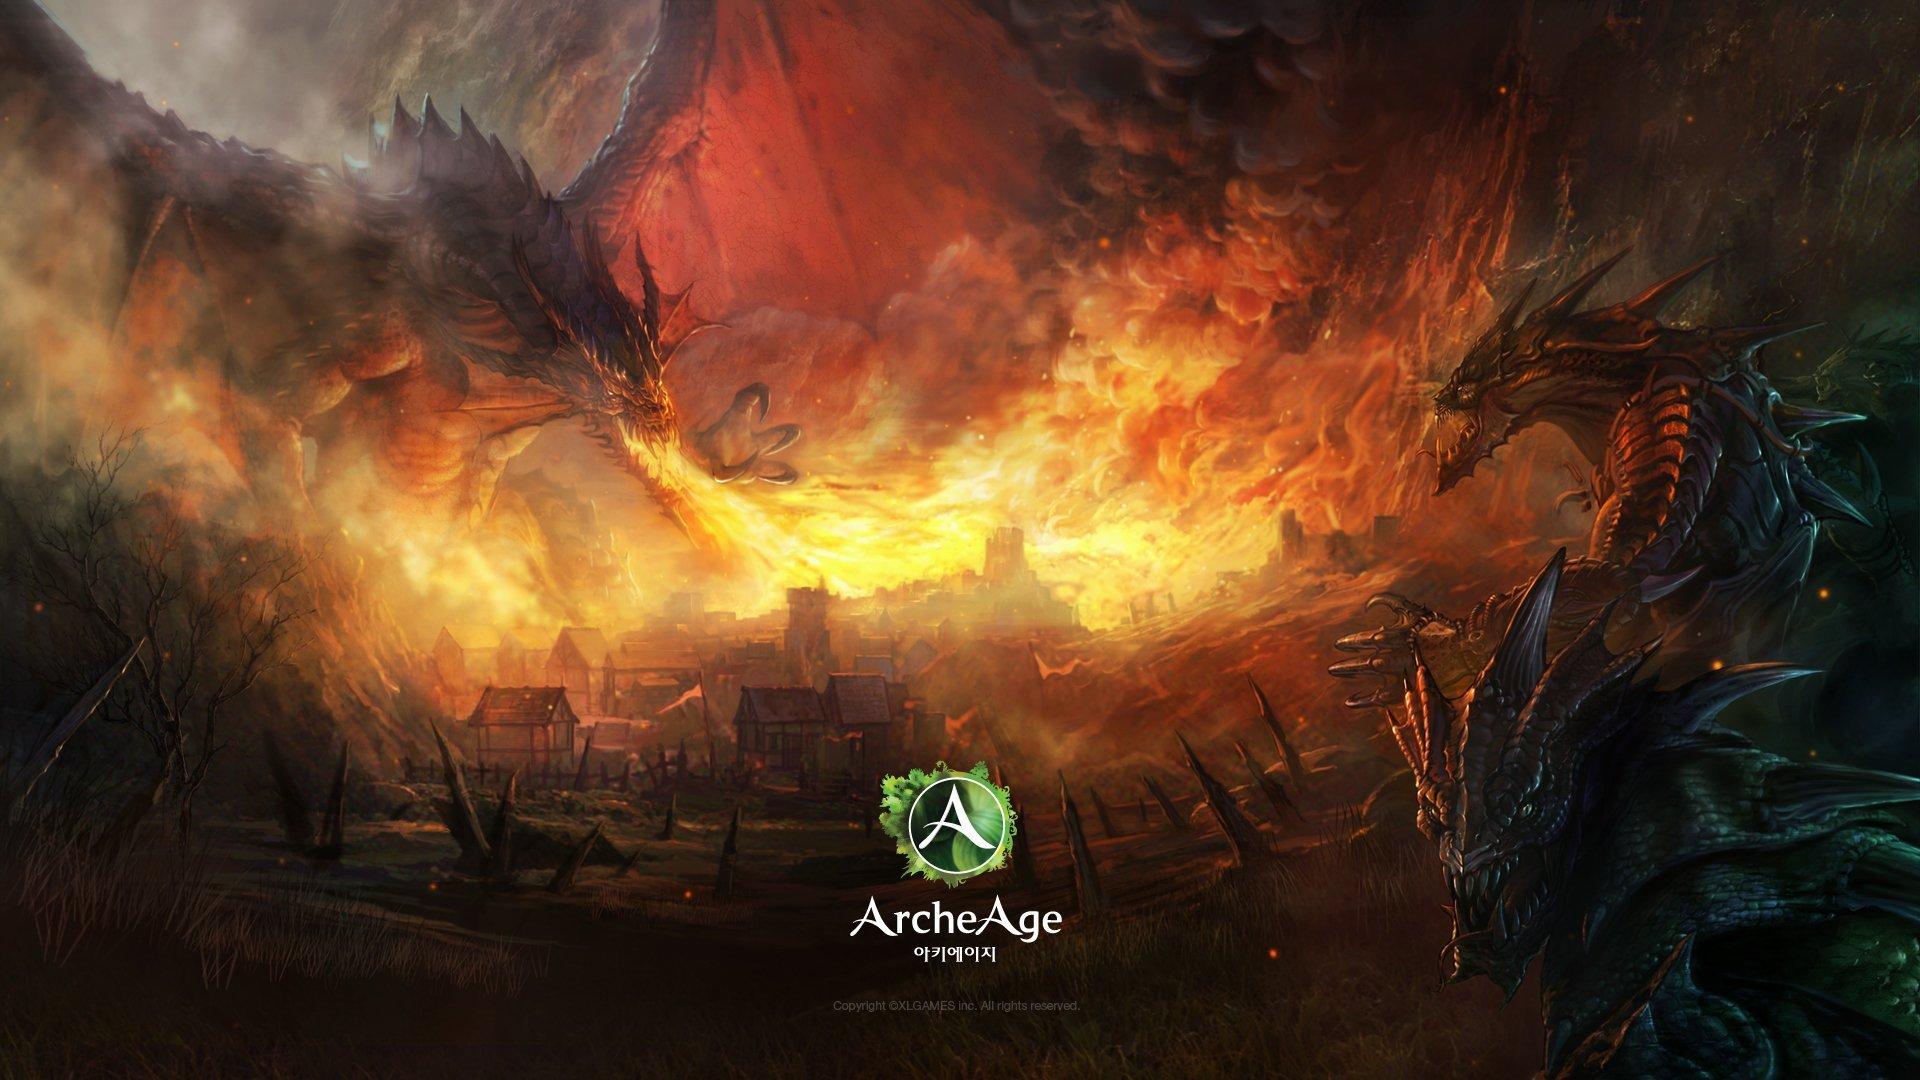 Archeage Mmorpg Online Game Art Creatures Dragon Fire